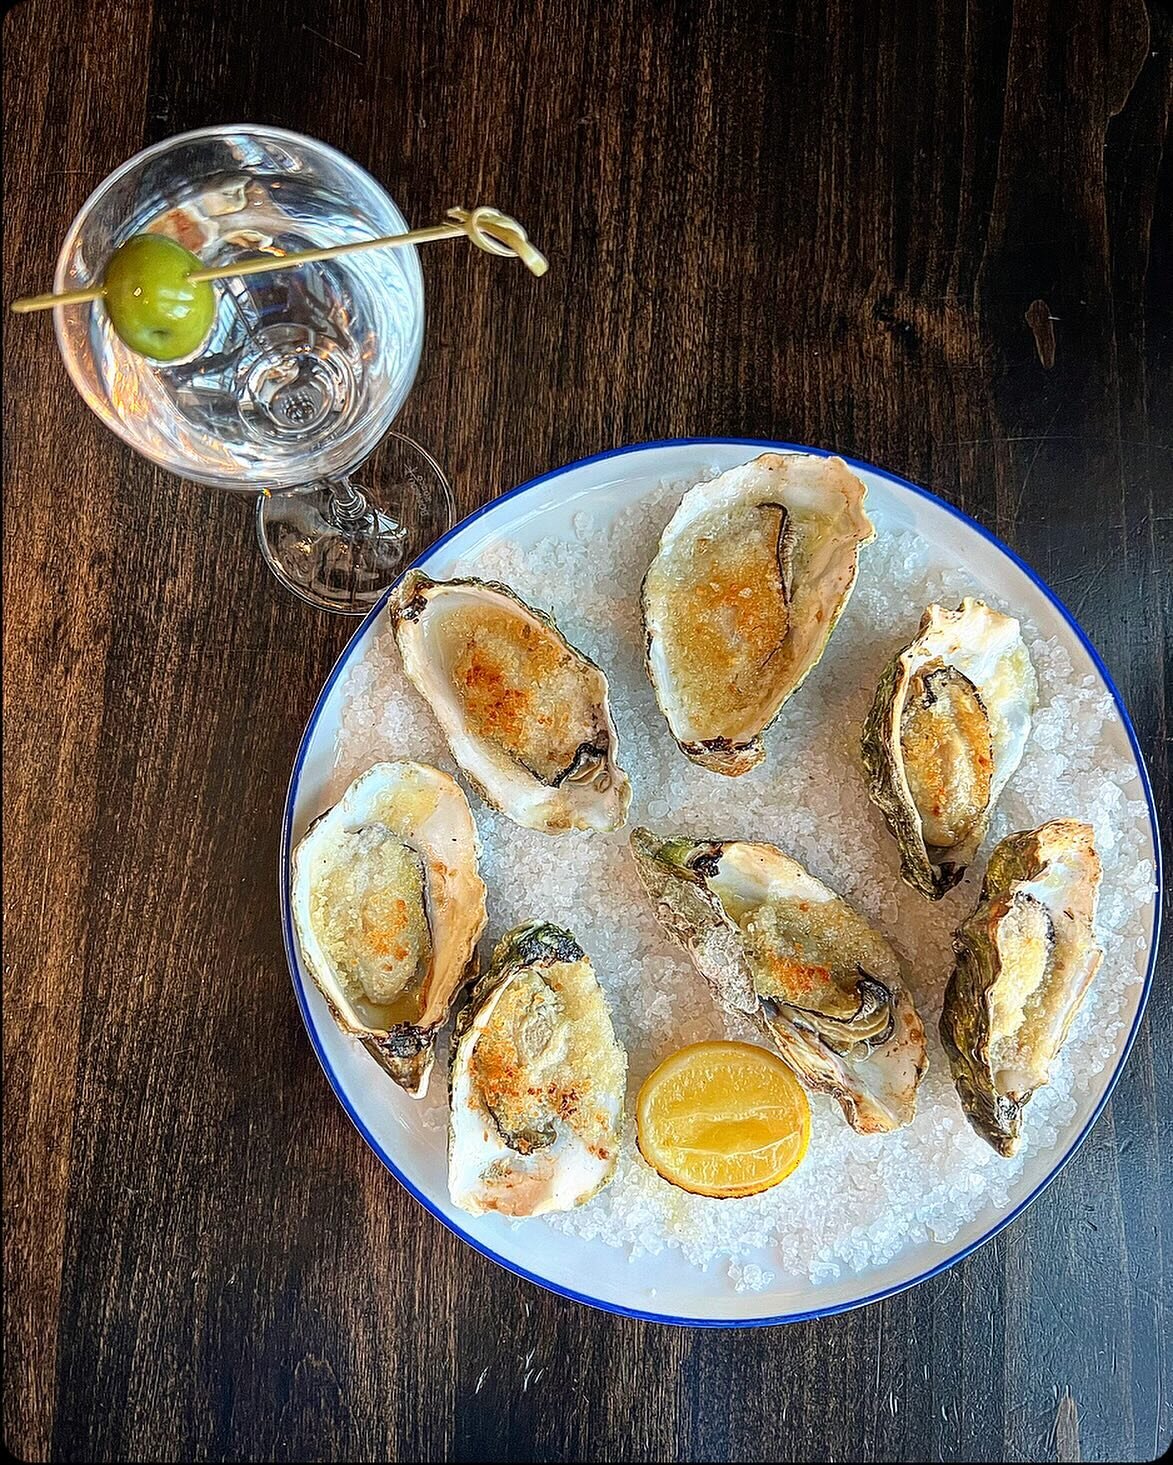 While our birthday was yesterday&hellip; we are celebrating today!!

Grilled oysters with Calabrian butter and $7 martinis! Come celebrate with us &hearts;️